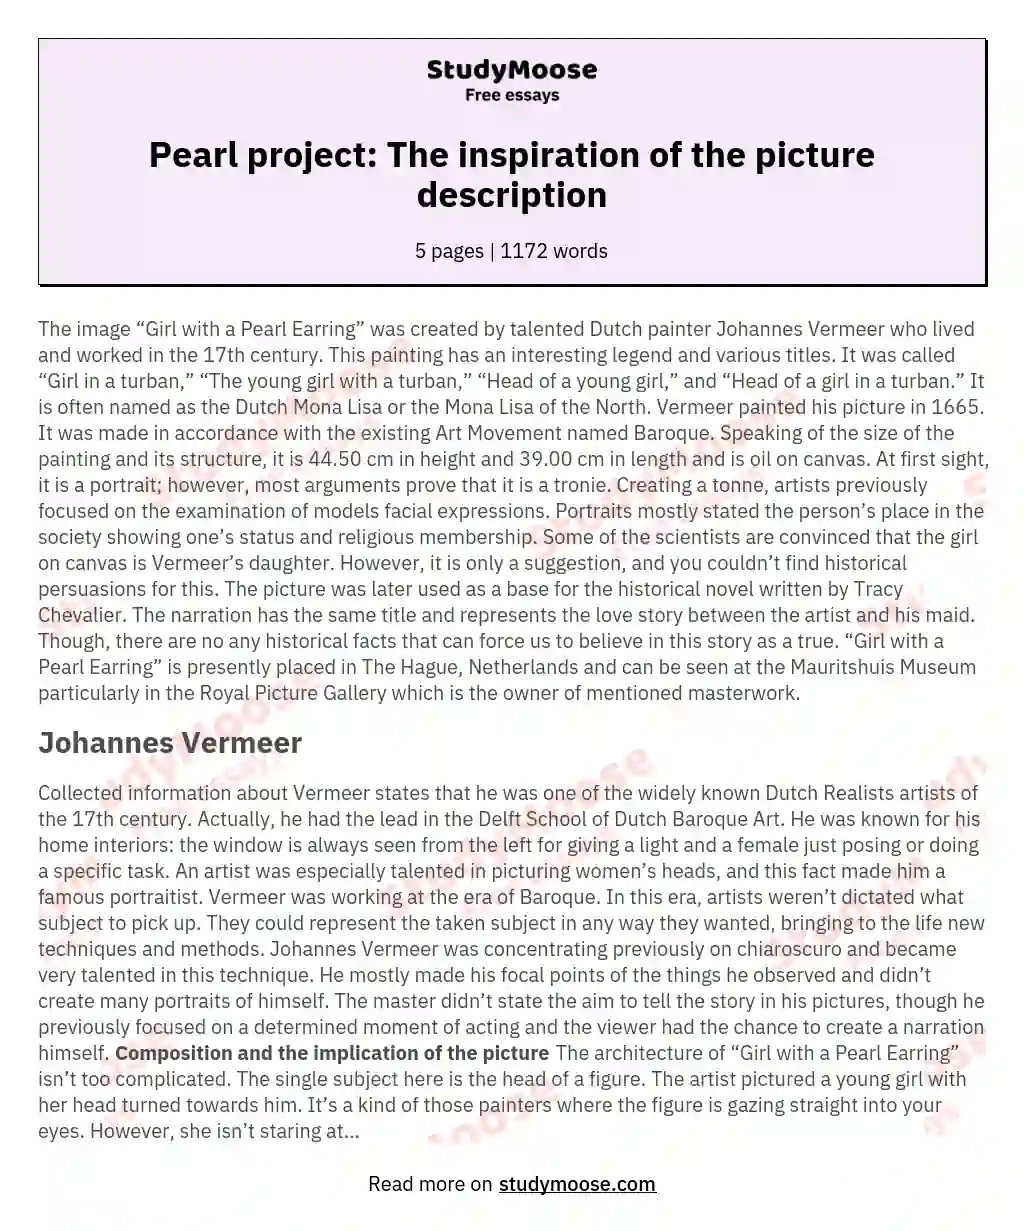 Pearl project: The inspiration of the picture description essay